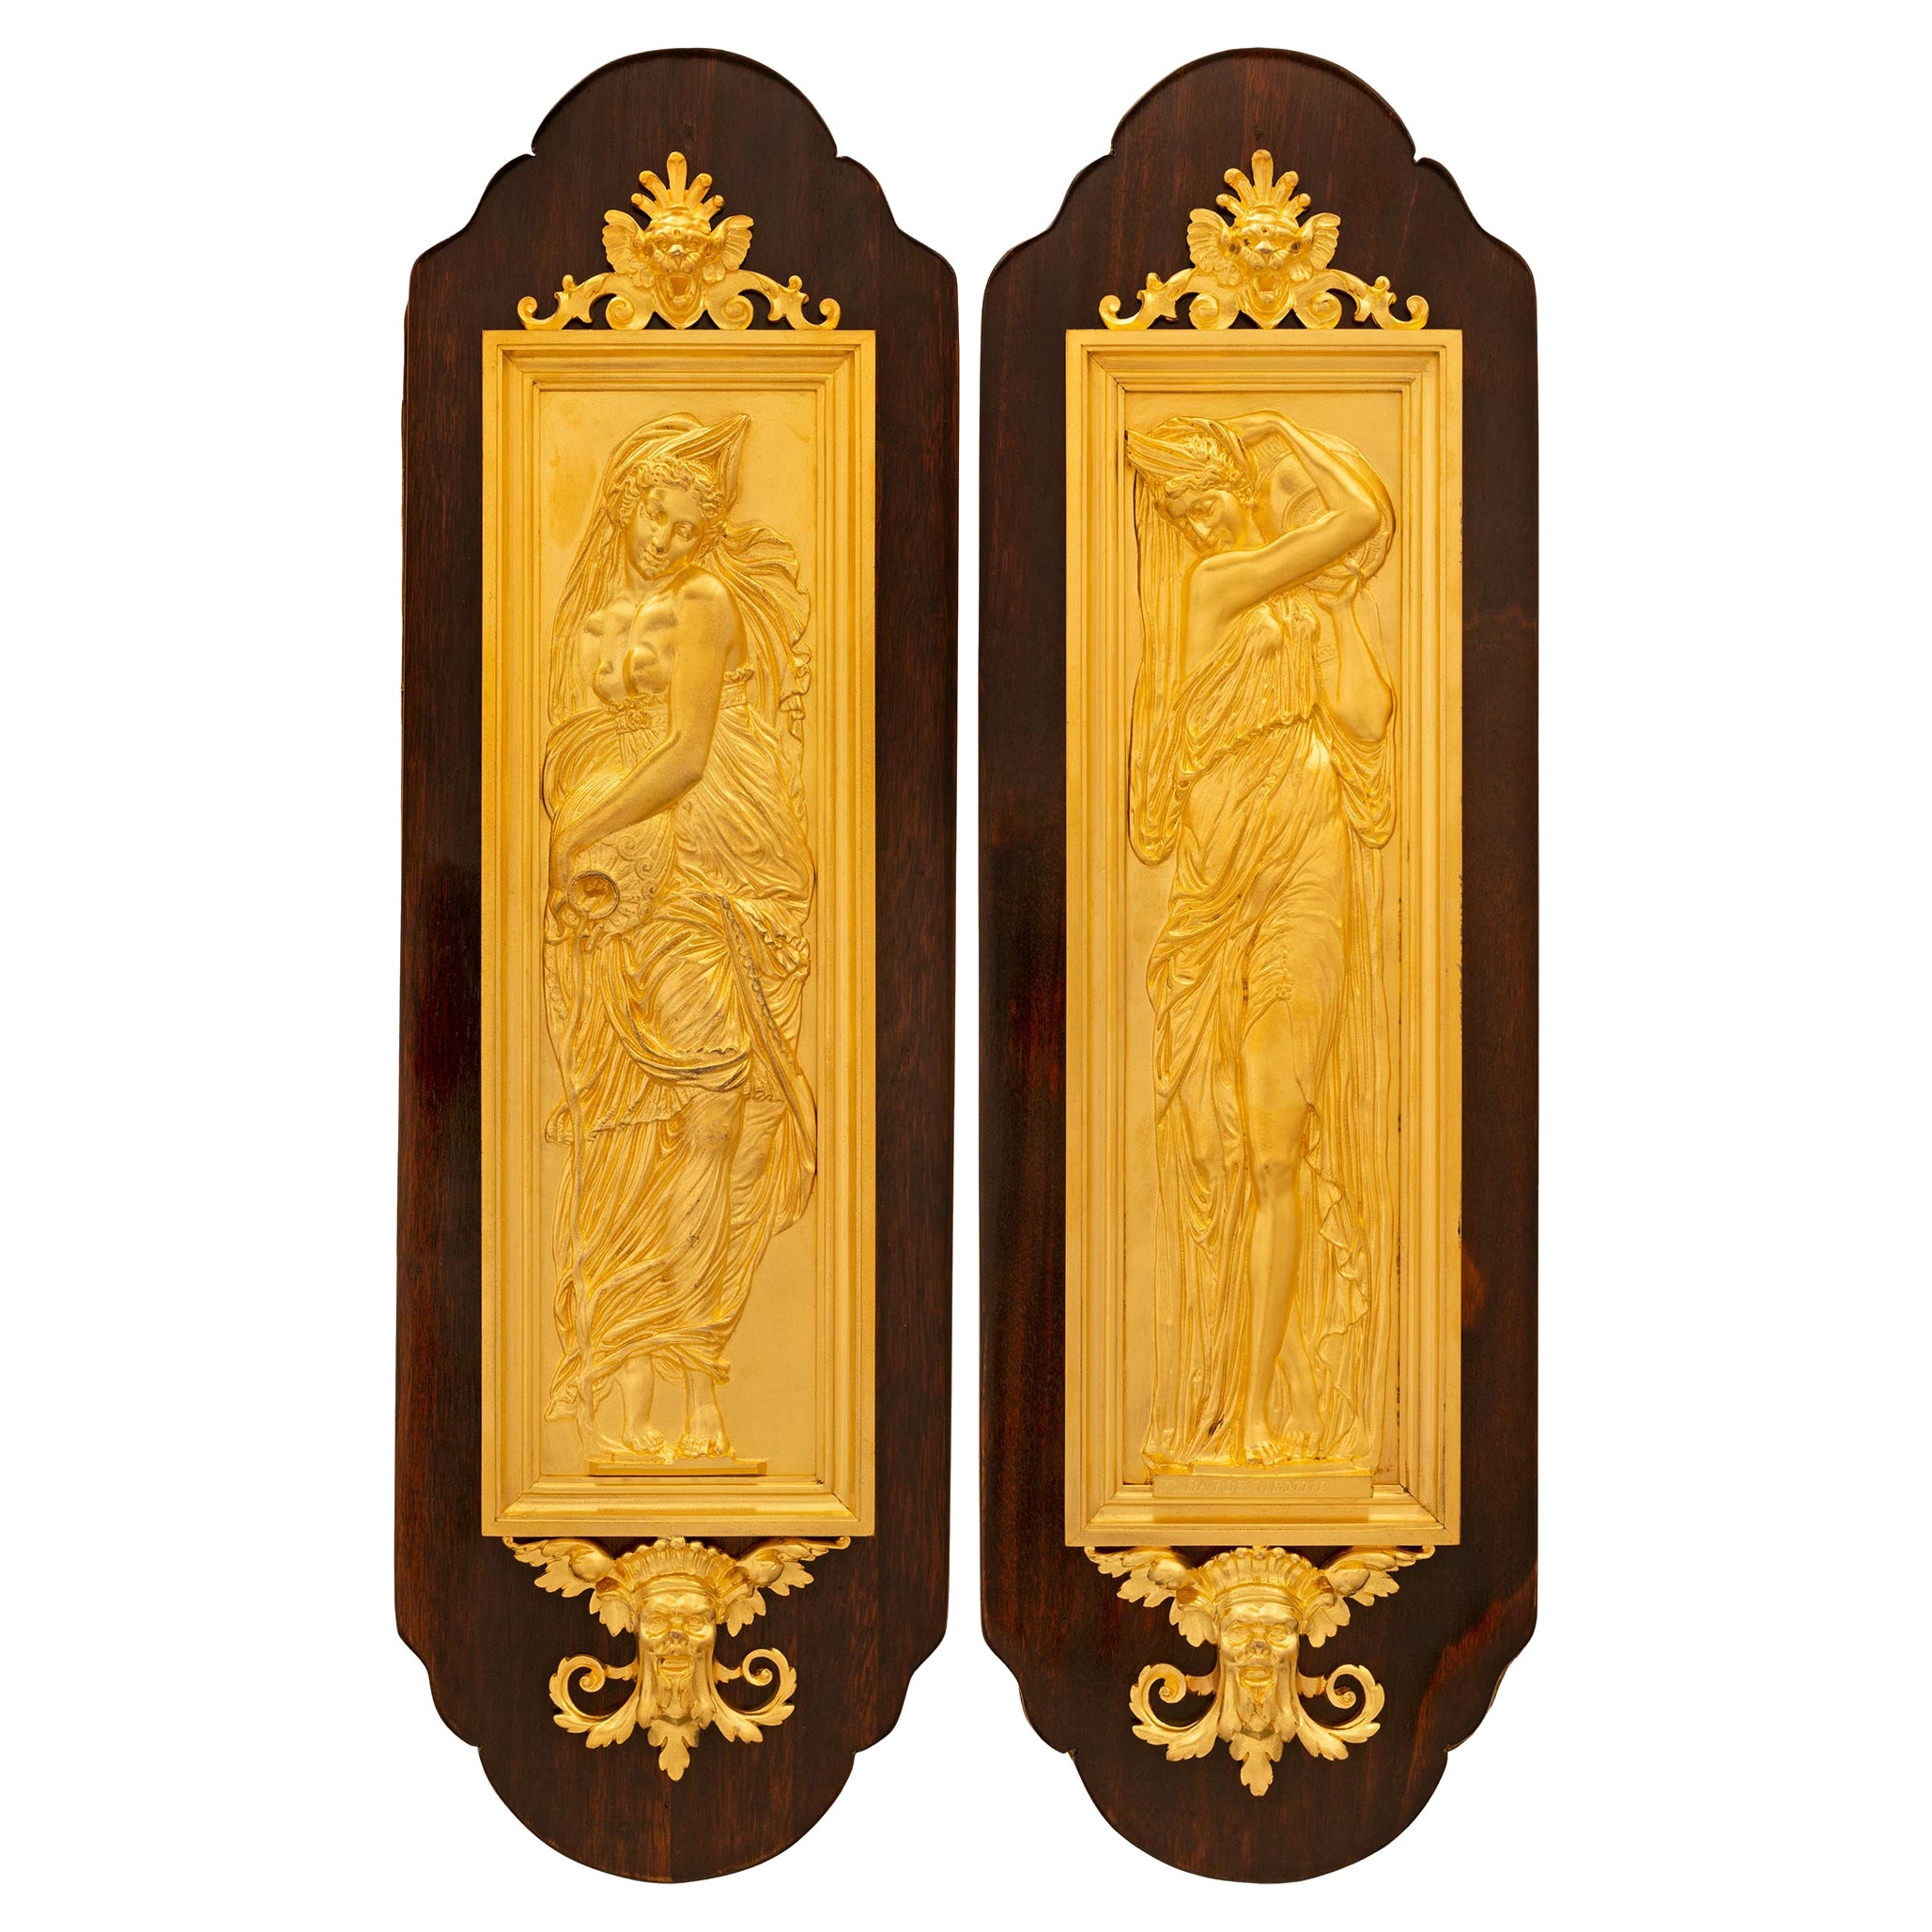 Pair of French 19th Century Belle Époque Period Mahogany & Ormolu Wall Plaques